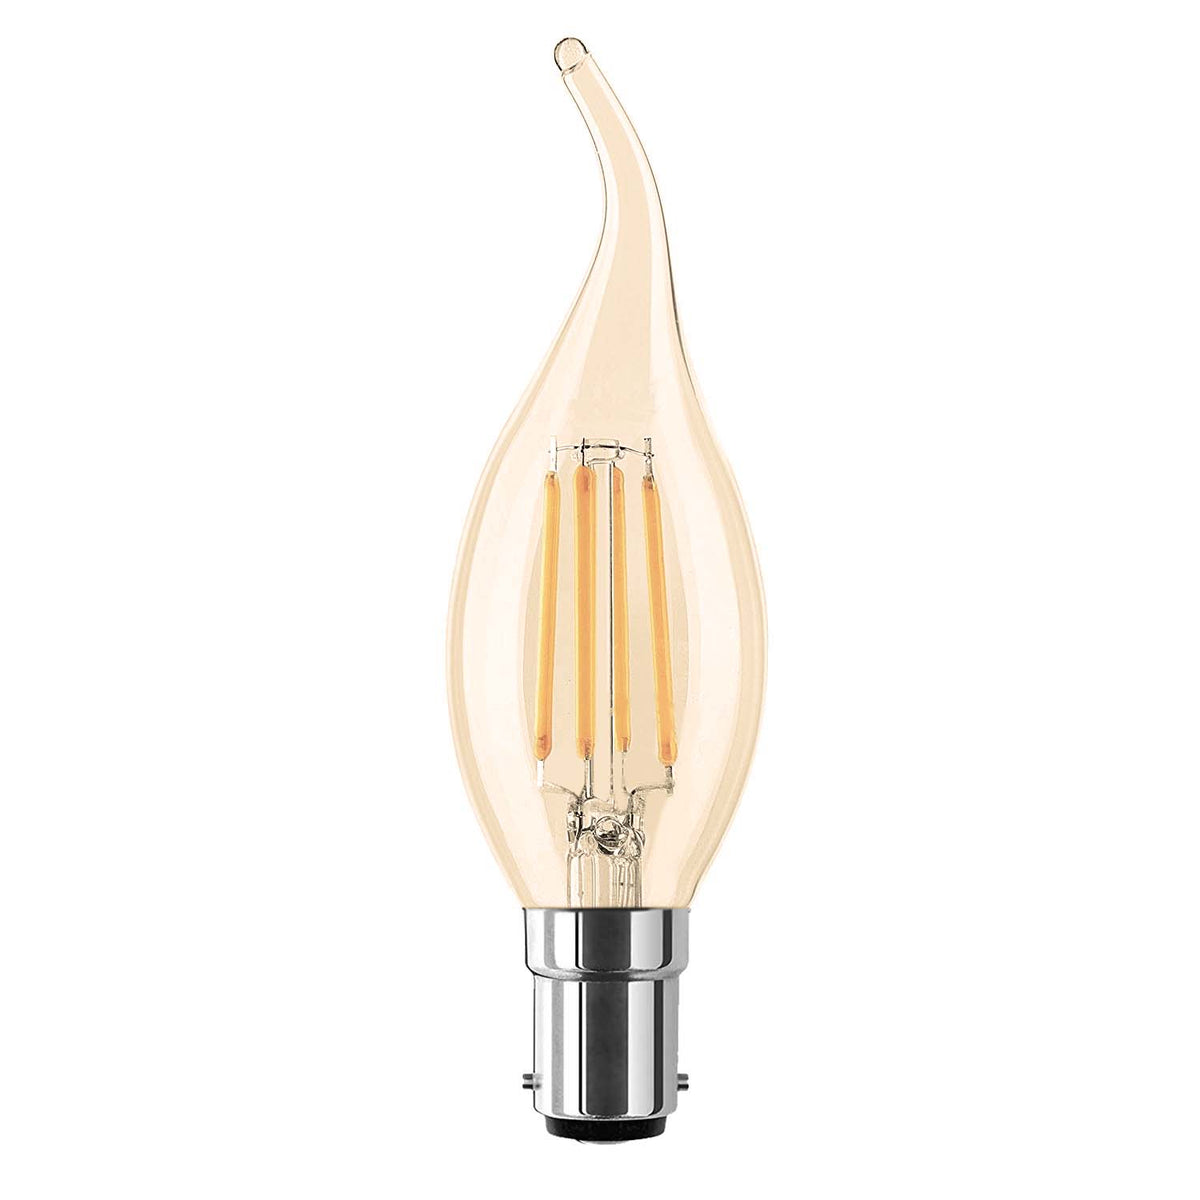 G.W.S LED Wholesale Filament LED Bulbs Candle (Amber) / B15 / Warm White (2700K) C35 Vintage Style Dimmable B15 4W LED Filament Flame Tip Candle Light Bulb